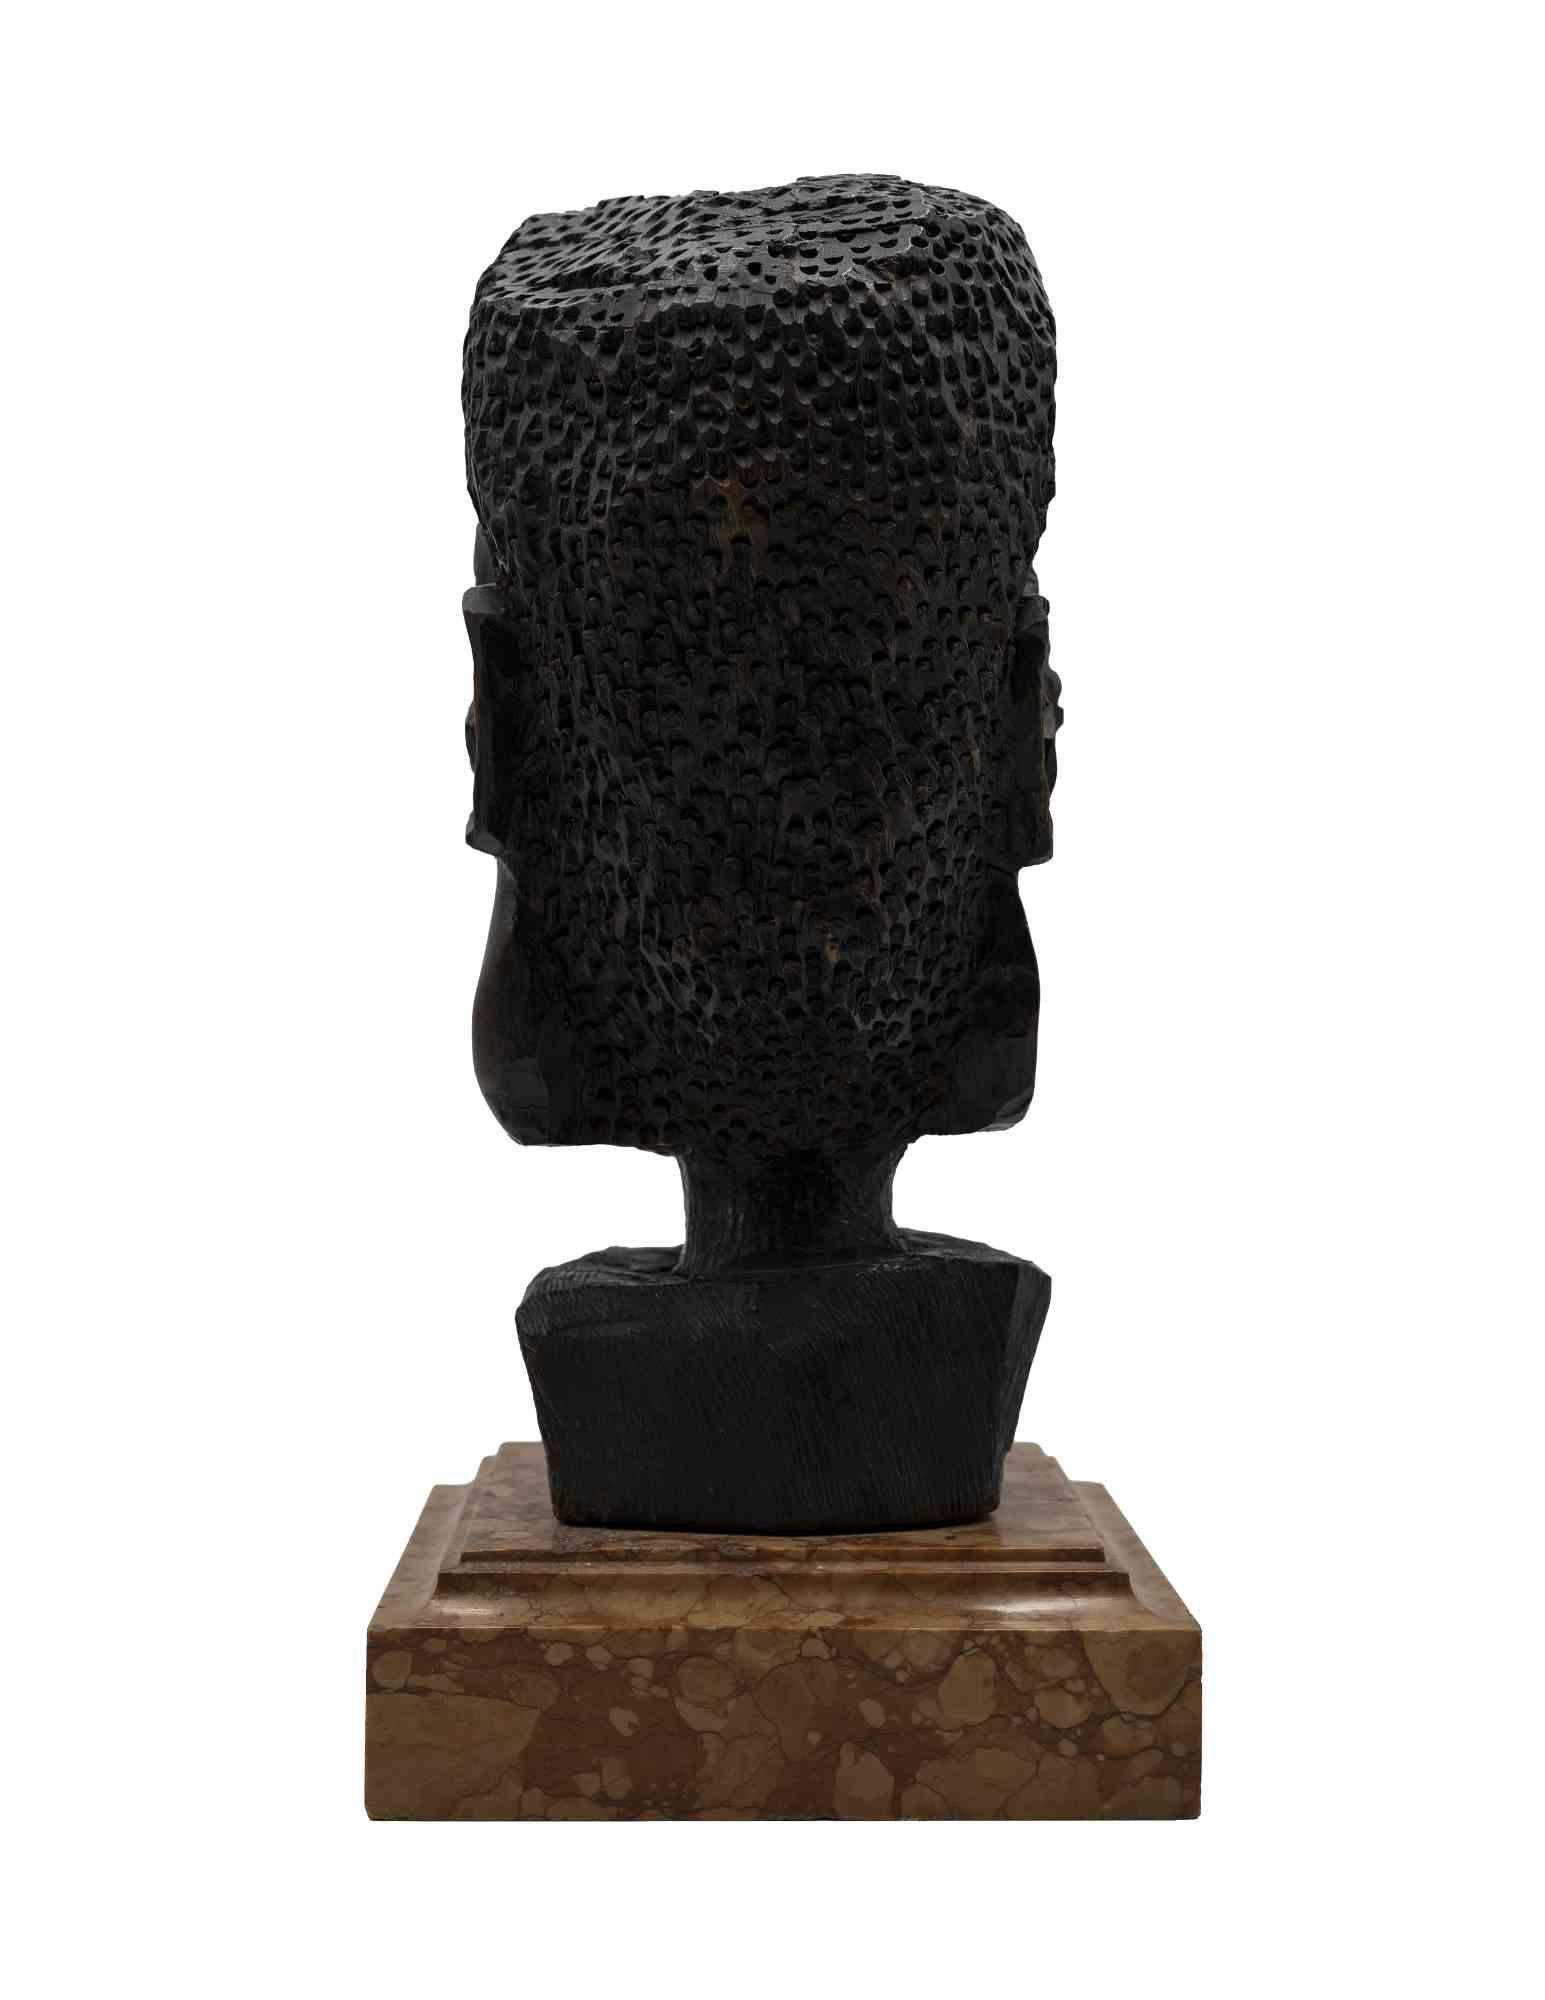 African Head - Sculpture - Mid 20th Century - Black Figurative Sculpture by Unknown